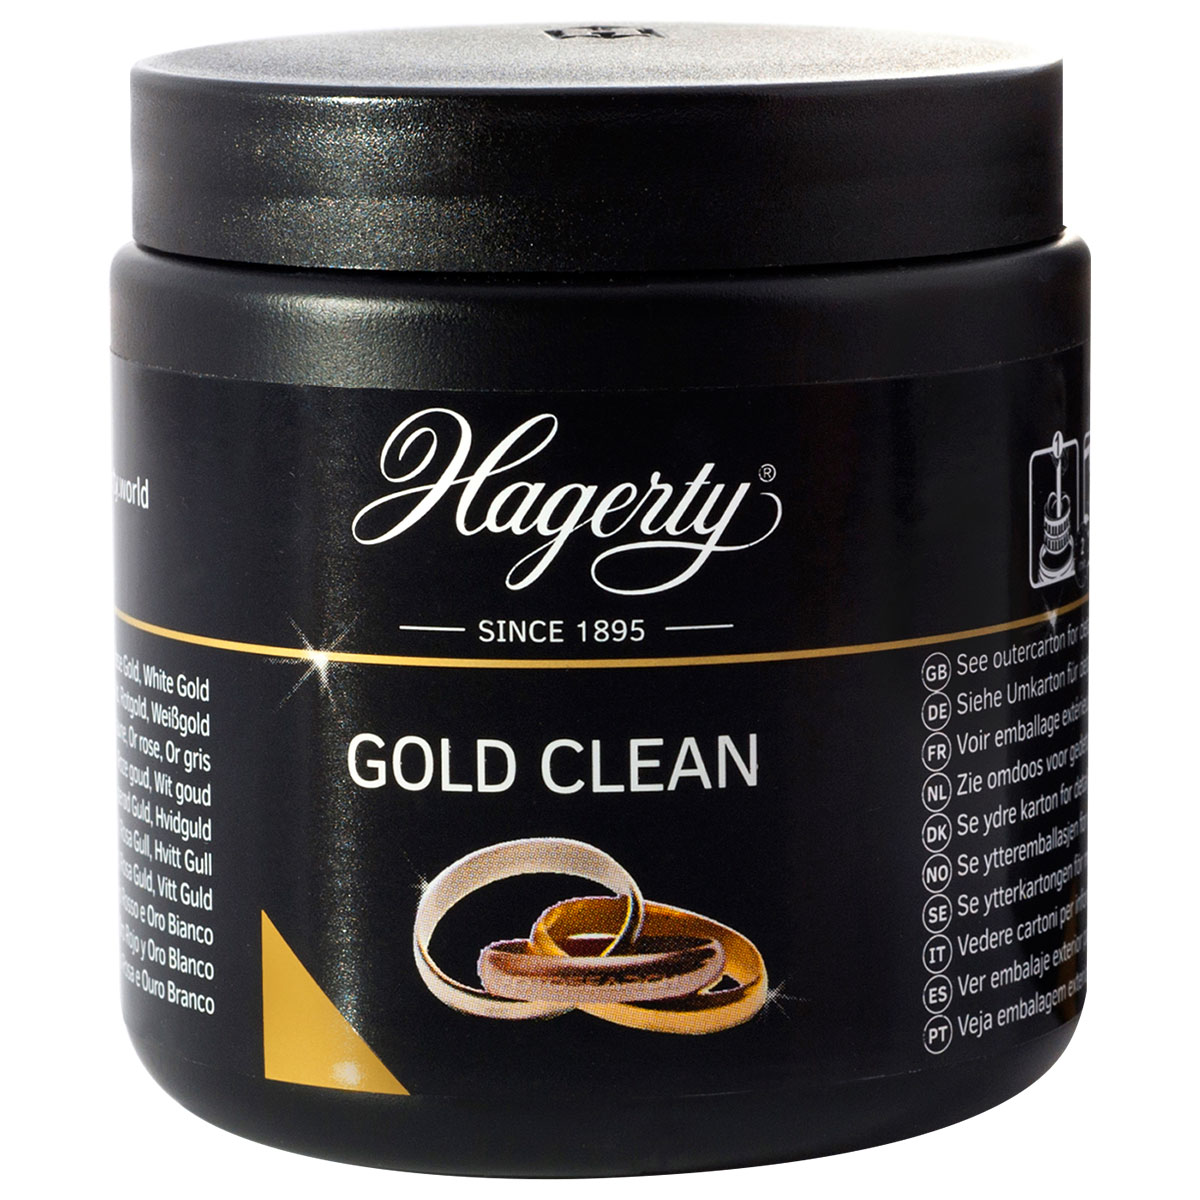 Hagerty Gold Clean, bain d'immersion pour l'or, 170 ml